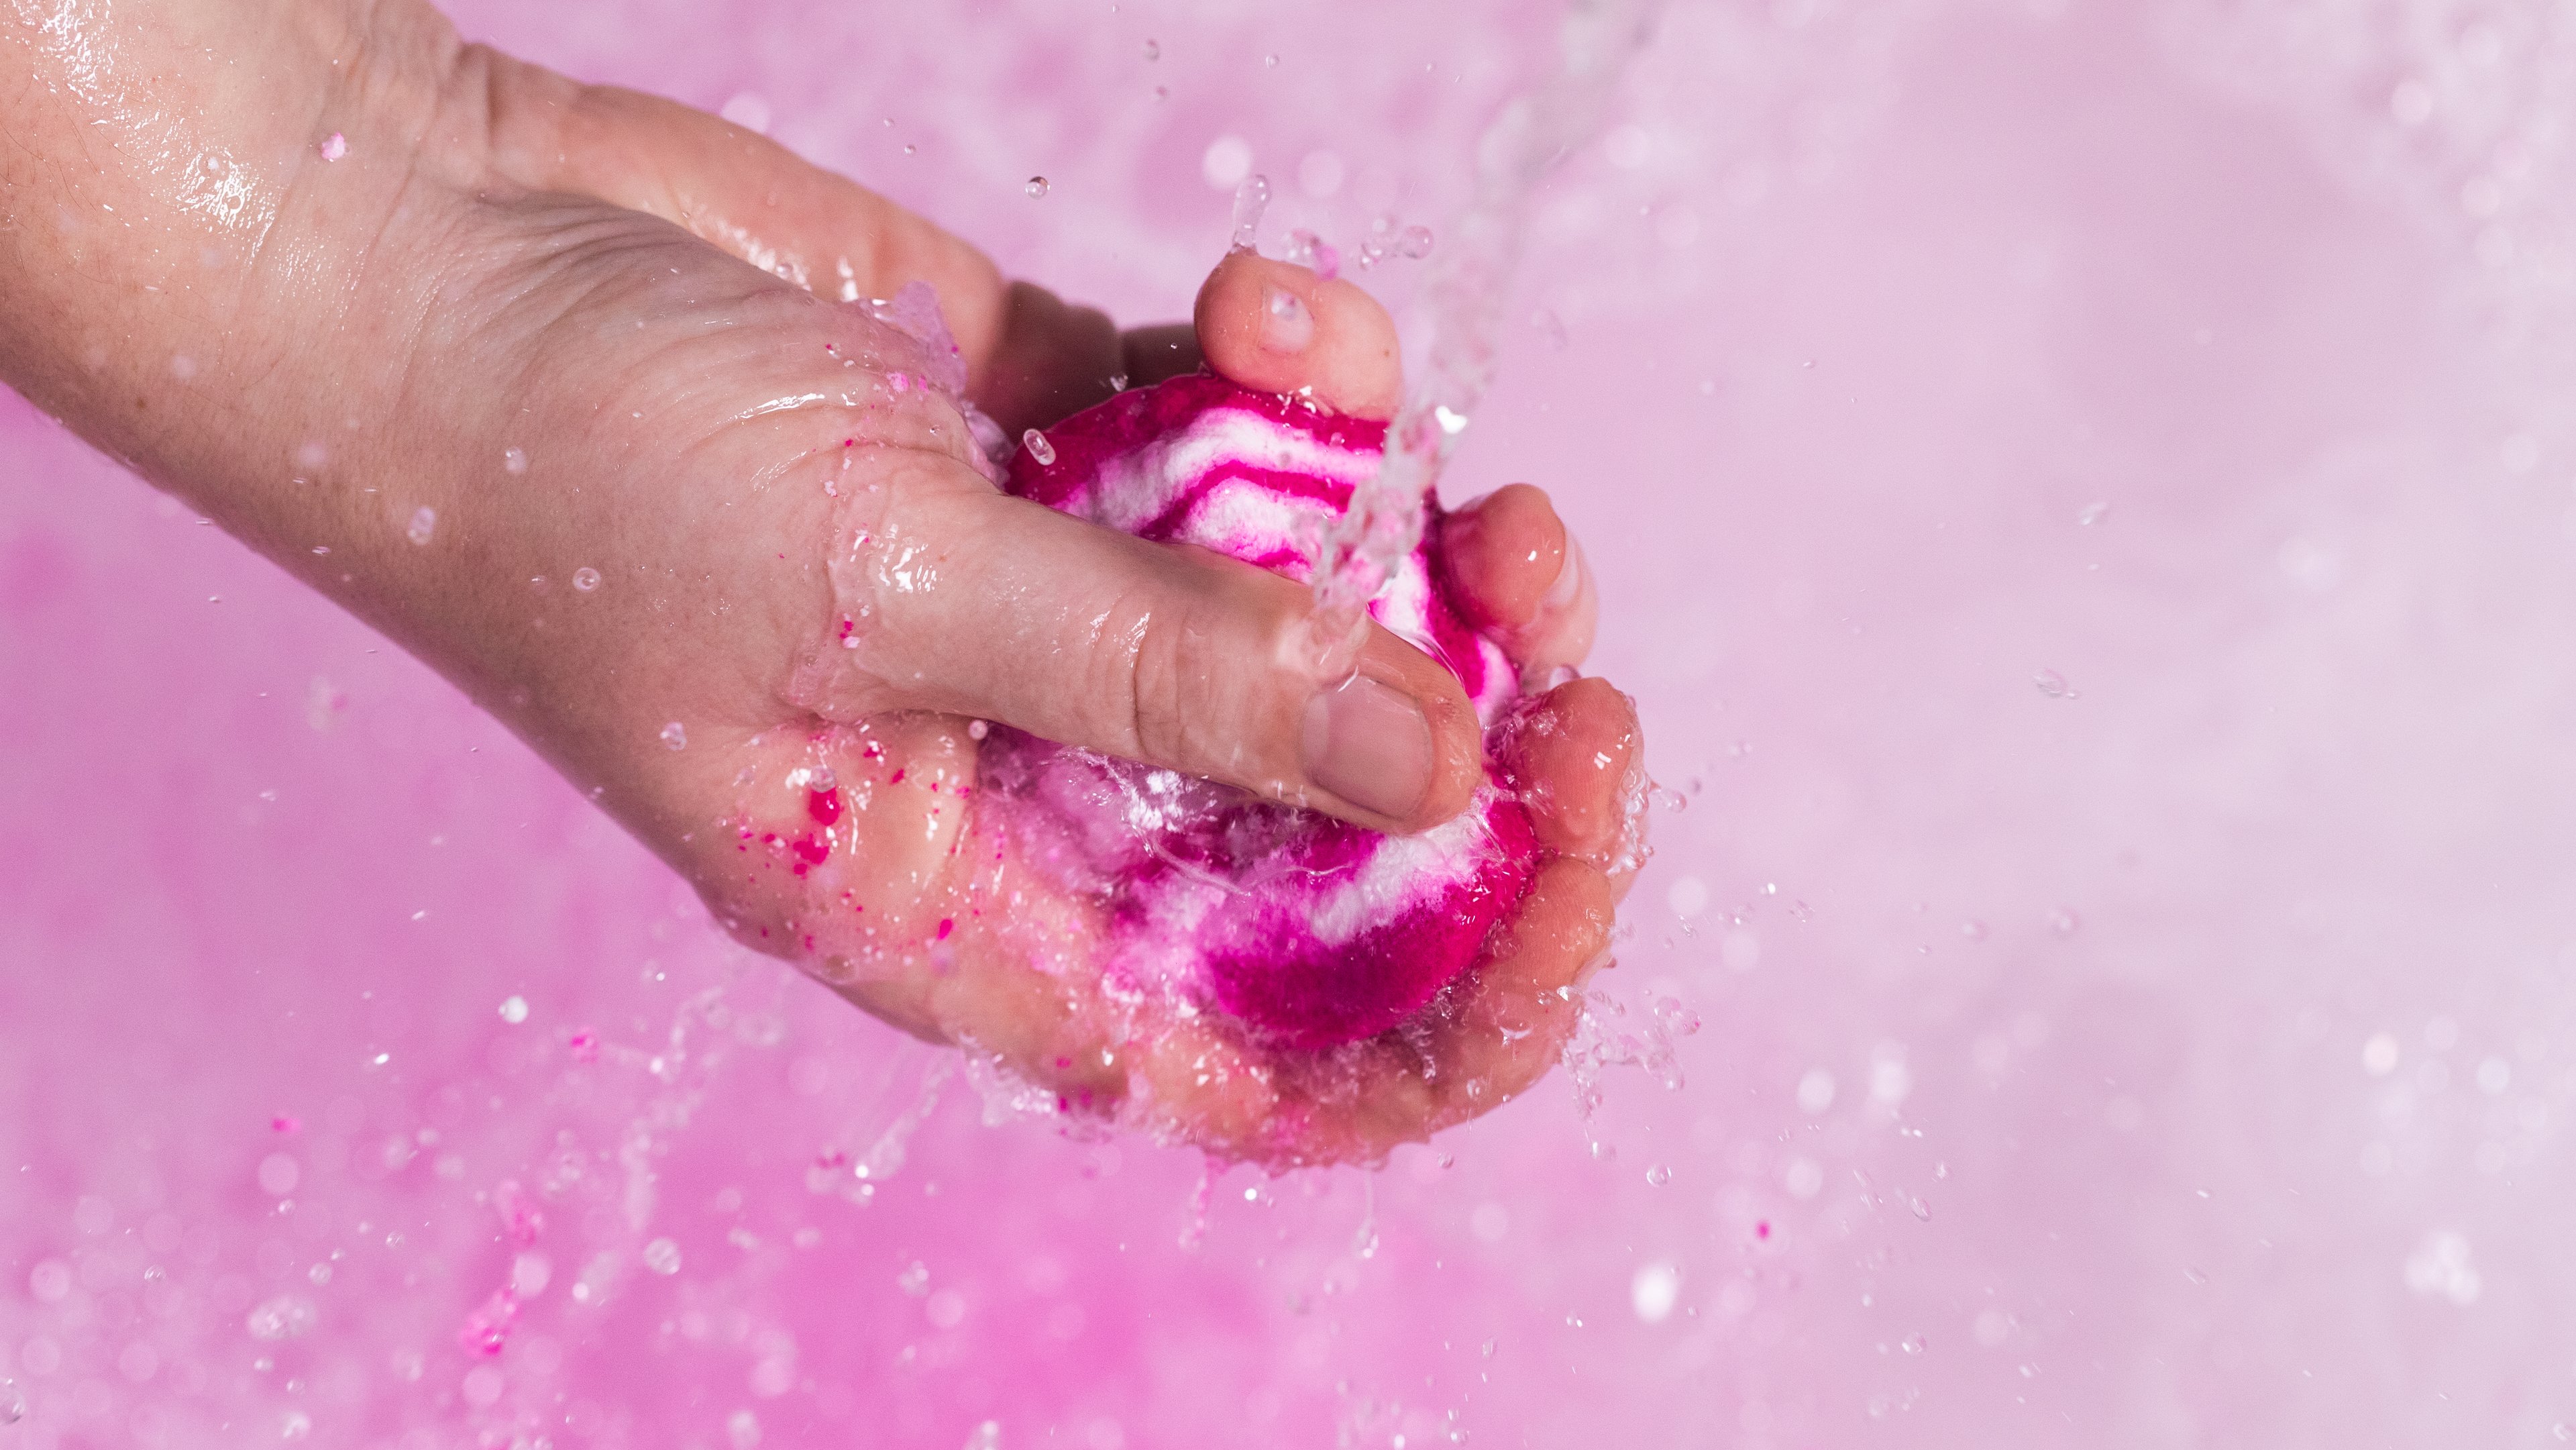 Model holds the Comforter bubble bar under running bath water as beautiful pink bubbles form below.